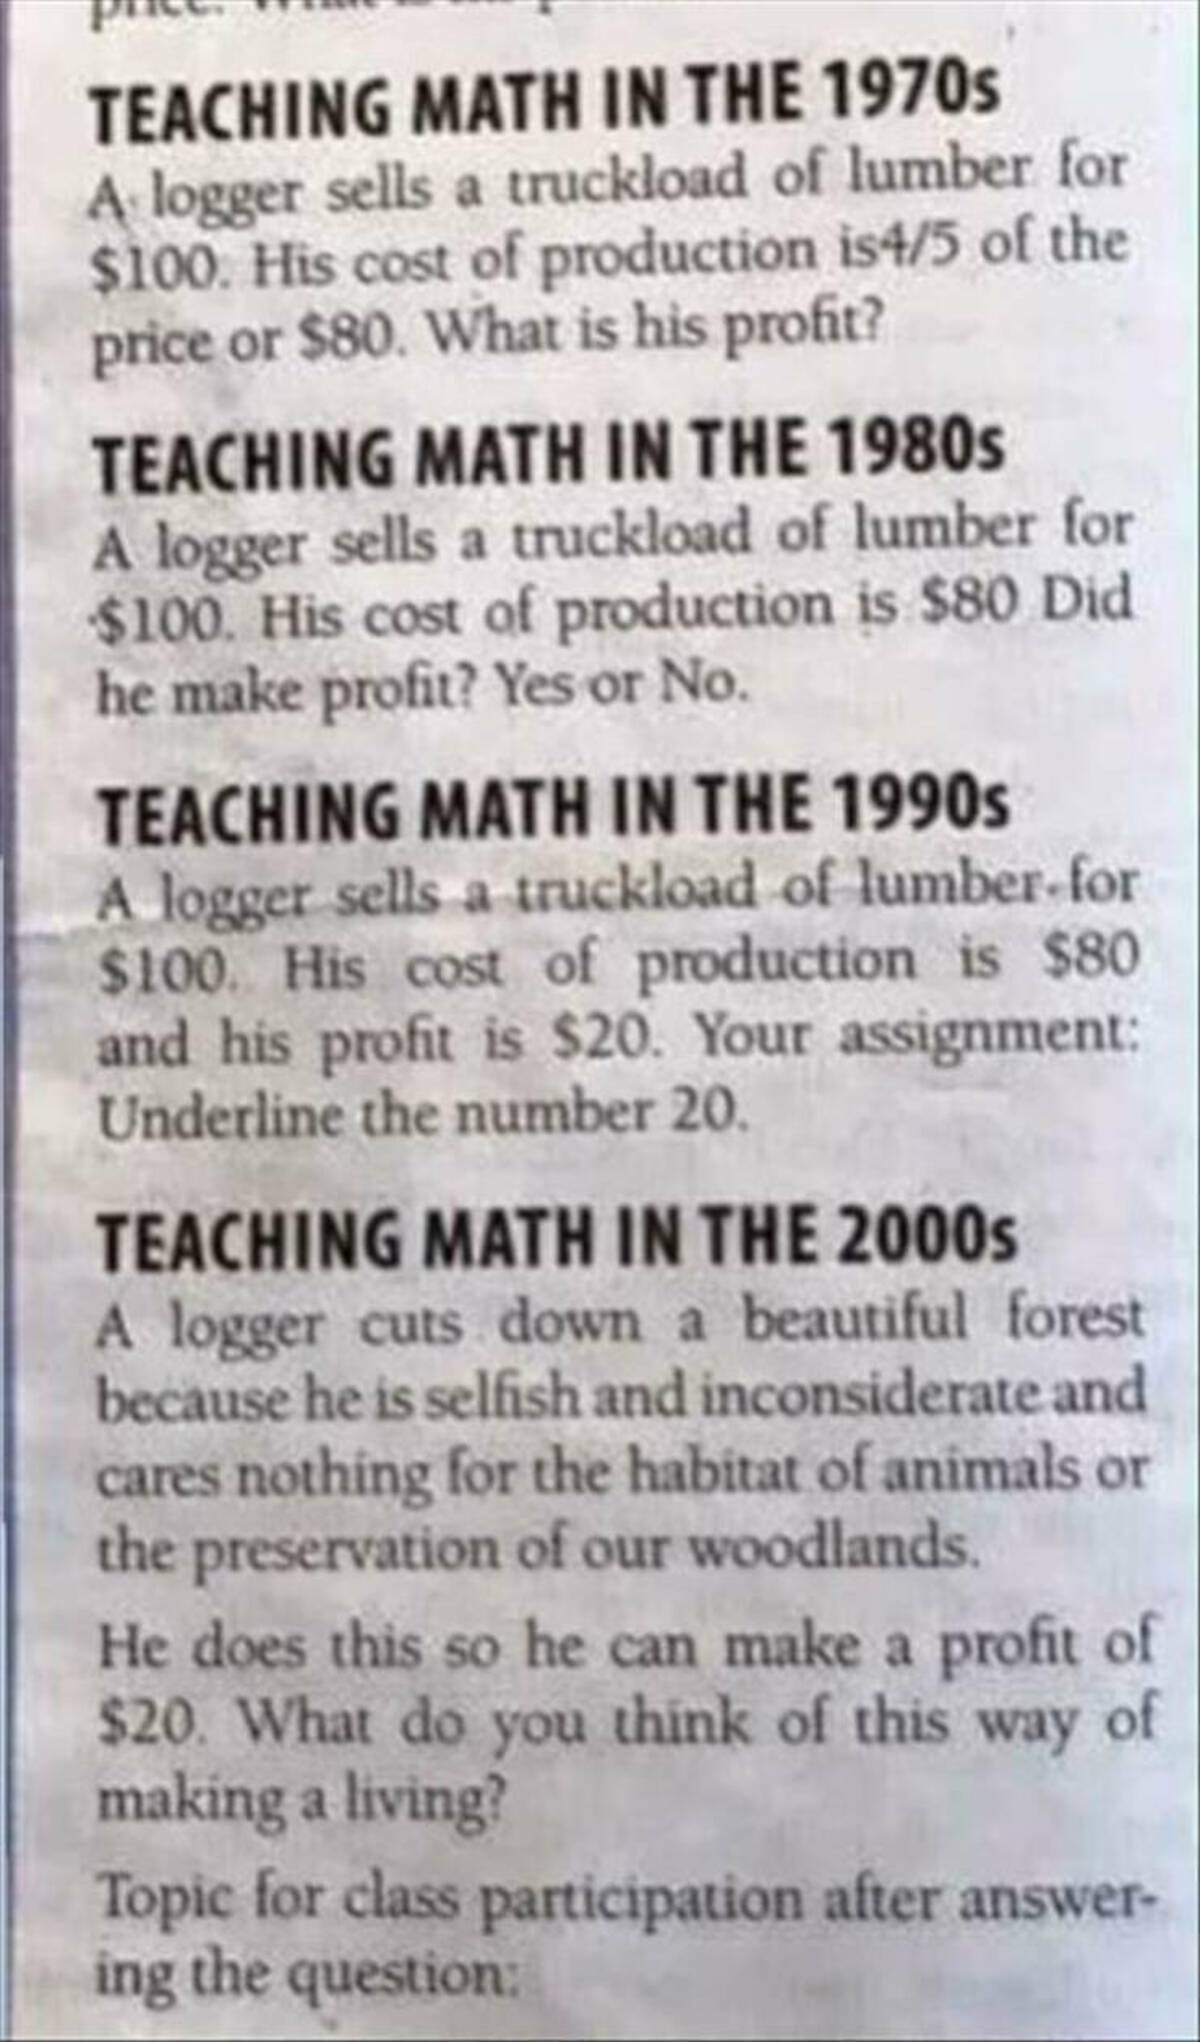 document - Teaching Math In The 1970s A logger sells a truckload of lumber for $100. His cost of production is45 of the price or $80. What is his profit? Teaching Math In The 1980s A logger sells a truckload of lumber for $100. His cost of production is $